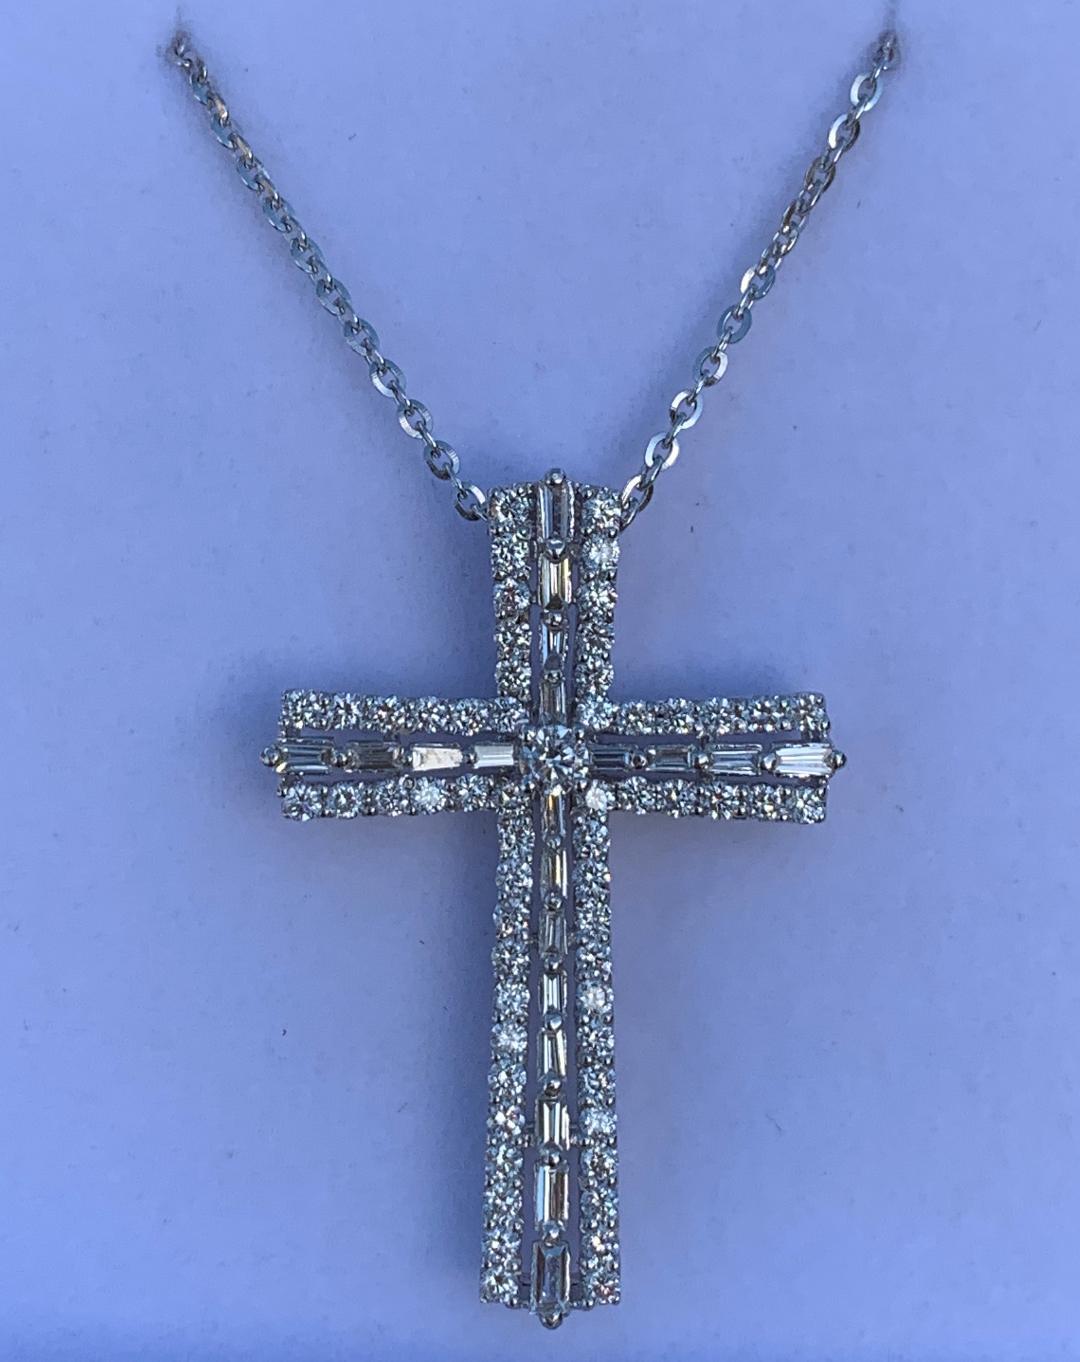 Celebrate your faith in elegant style with this luminous hand made estate diamond cross pendant necklace featuring approximately 1.25 carats of round and baguette cut diamonds, have a heavenly shine in a polished 18 karat white gold setting. Hidden